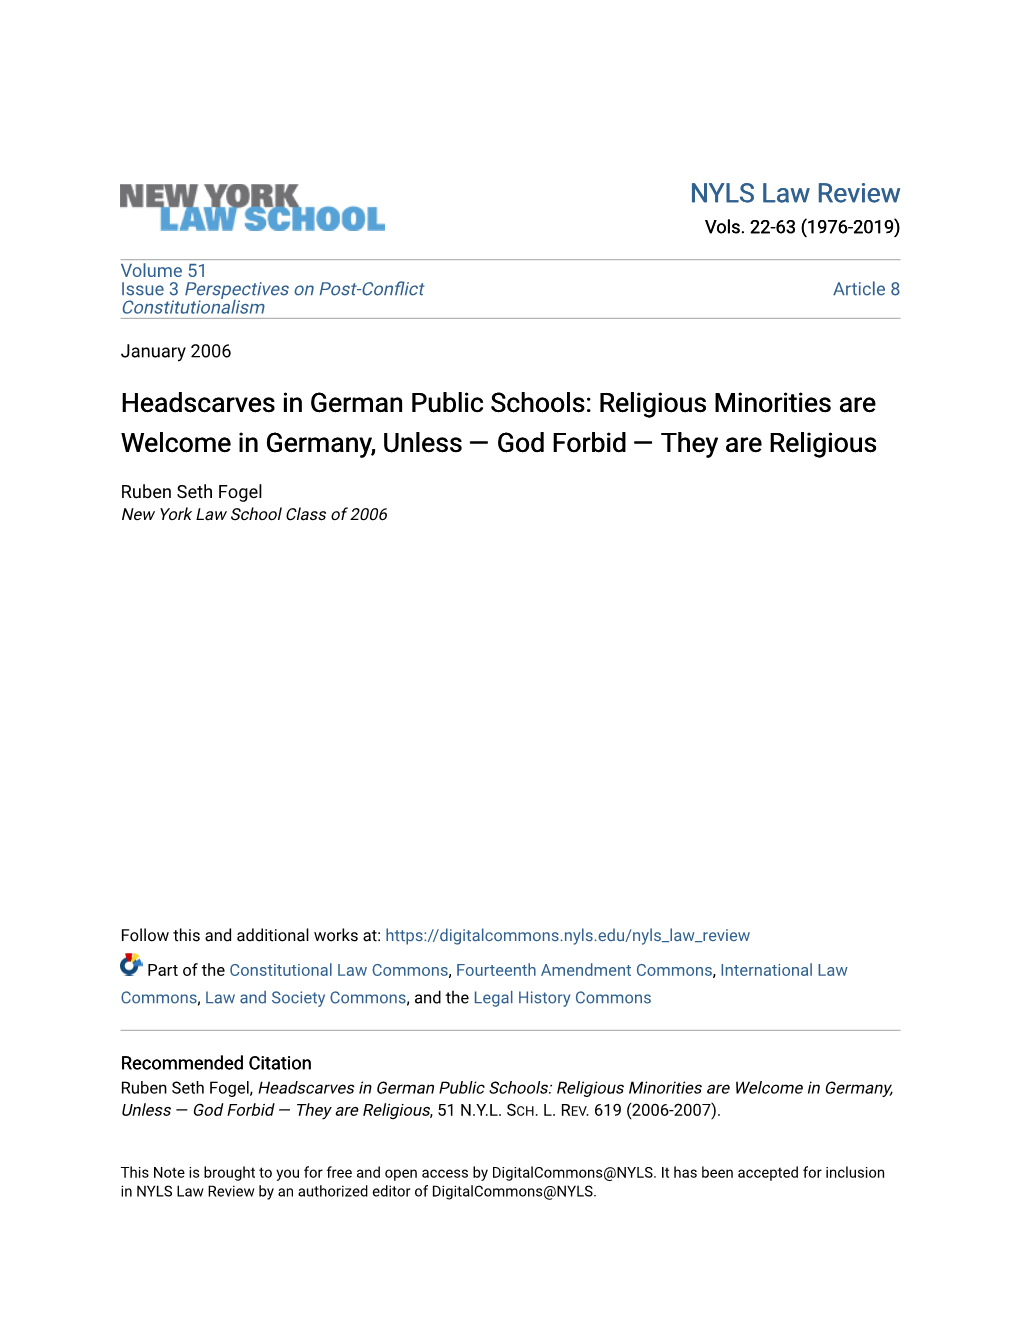 Headscarves in German Public Schools: Religious Minorities Are Welcome in Germany, Unless — God Forbid — They Are Religious